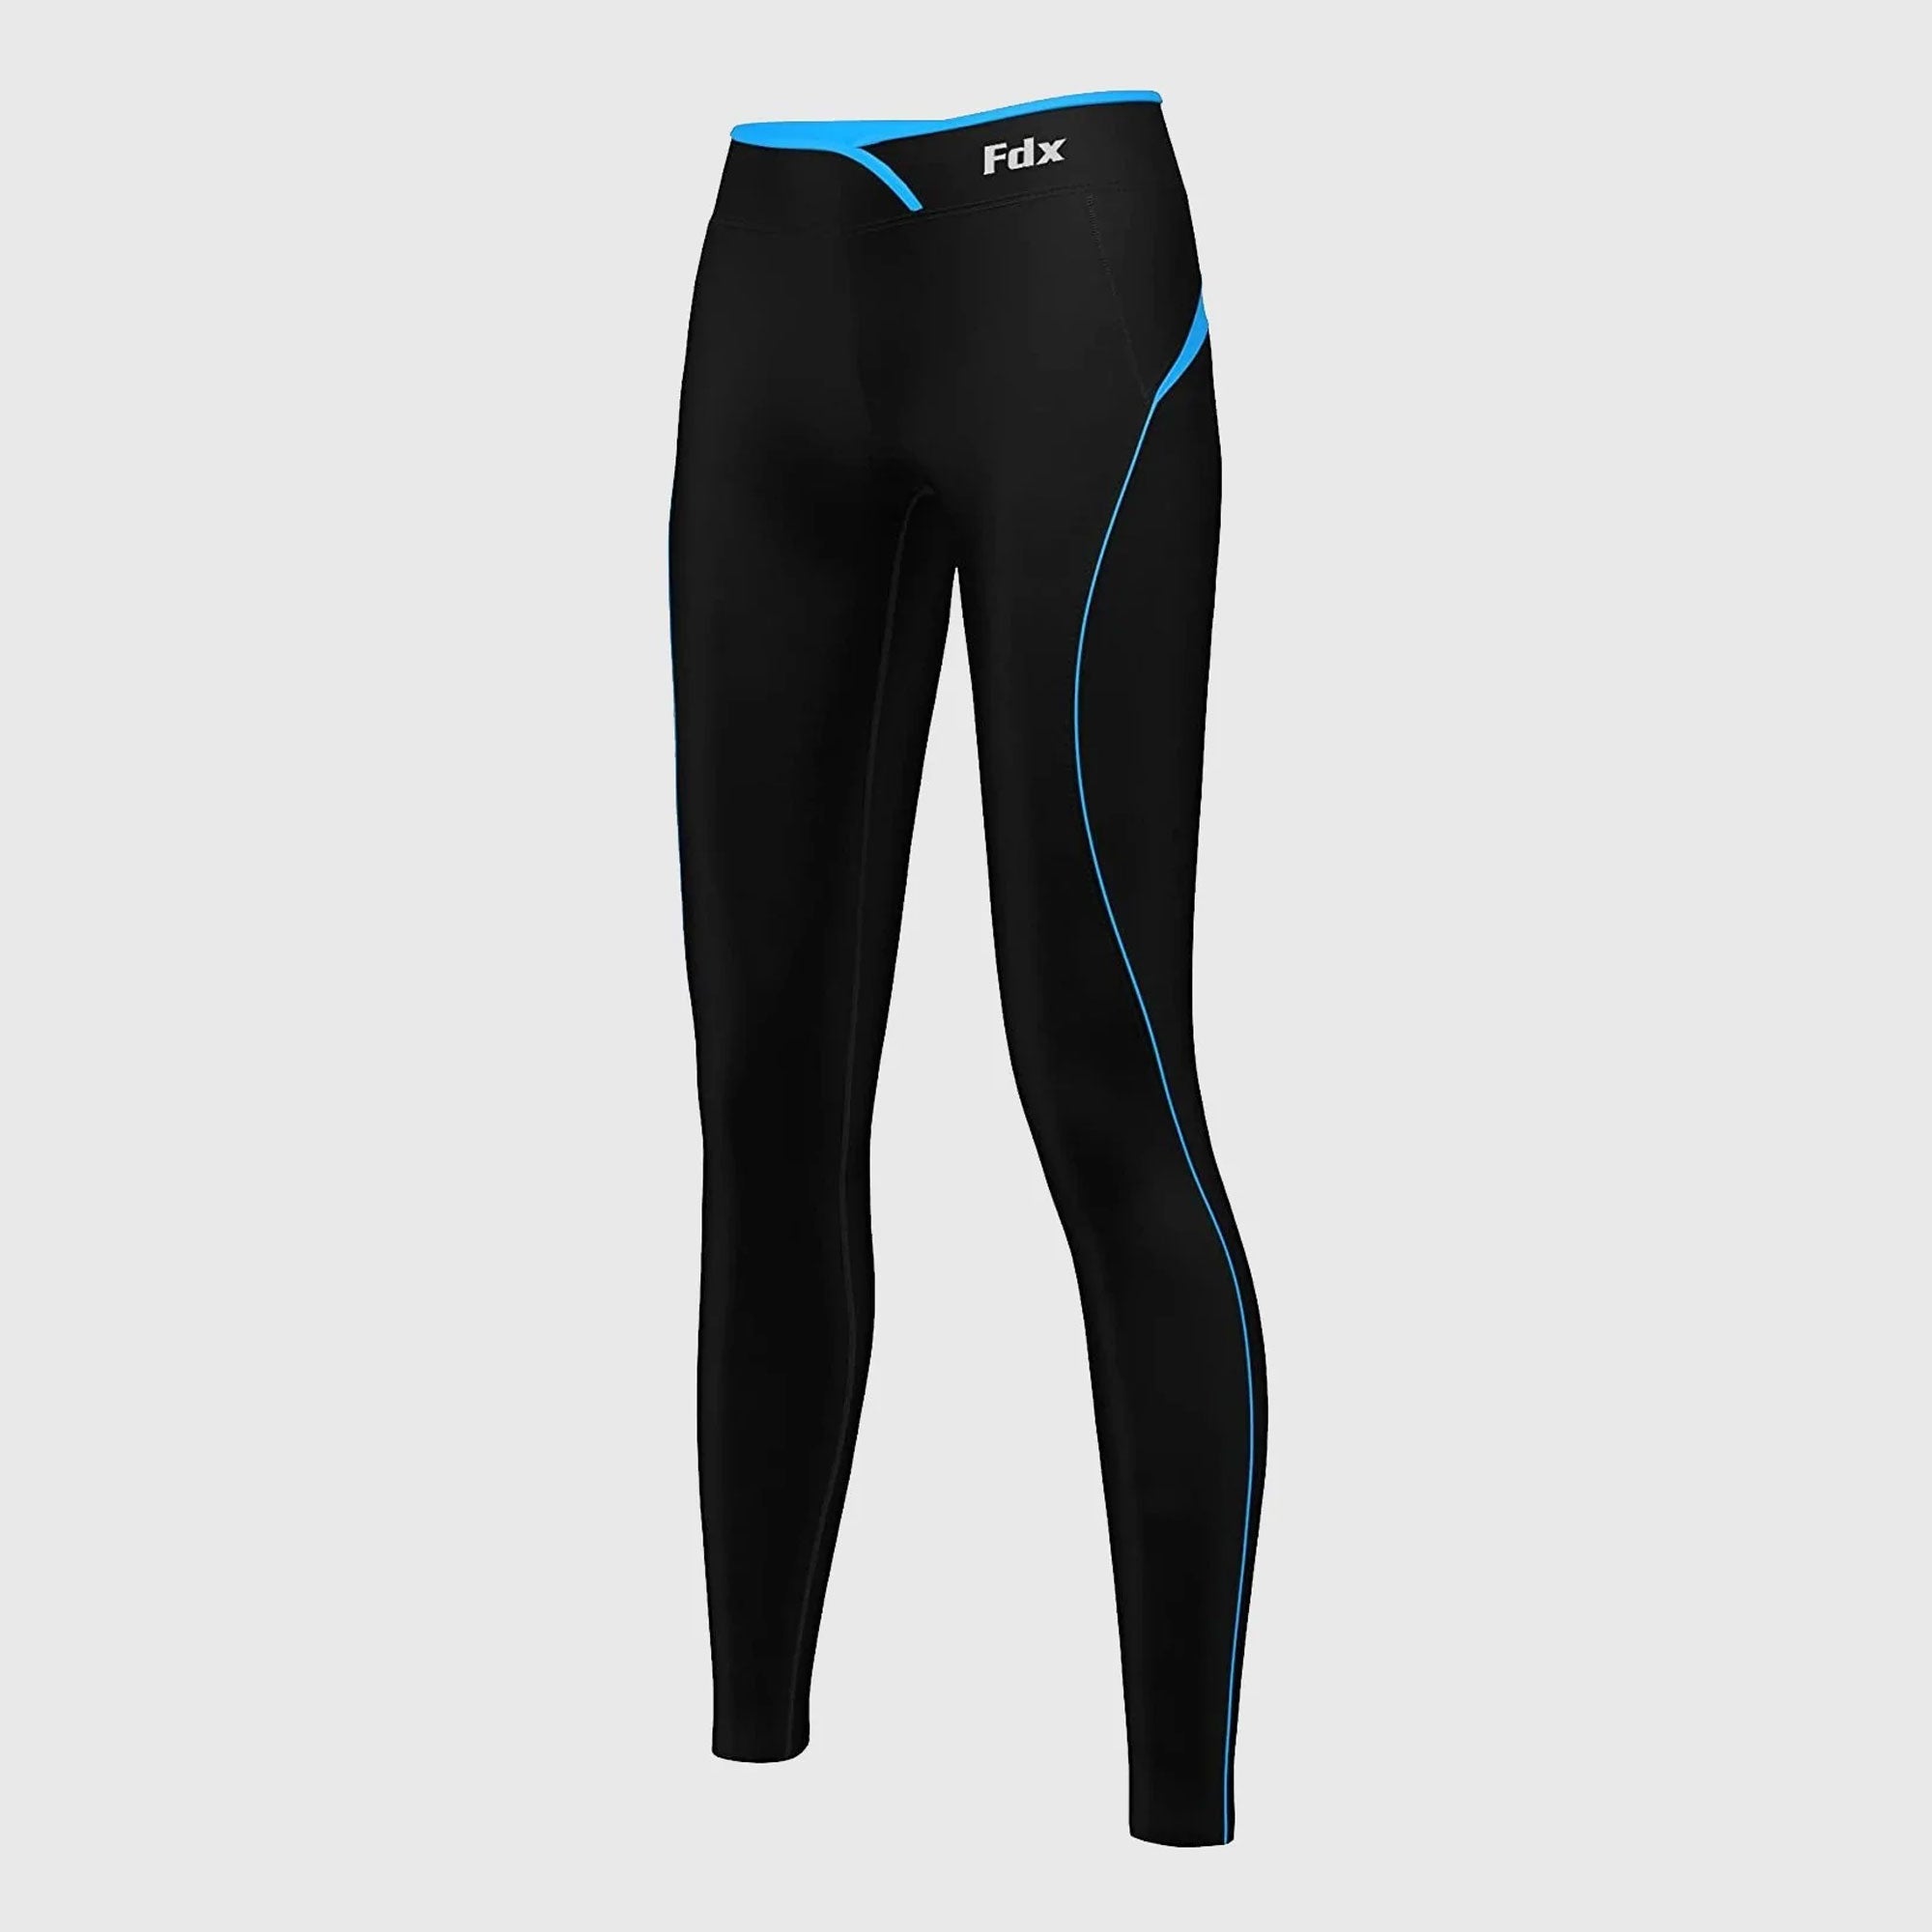 Fdx P2 Sky Blue Women's Thermal Base Layer Winter Compression Leggings